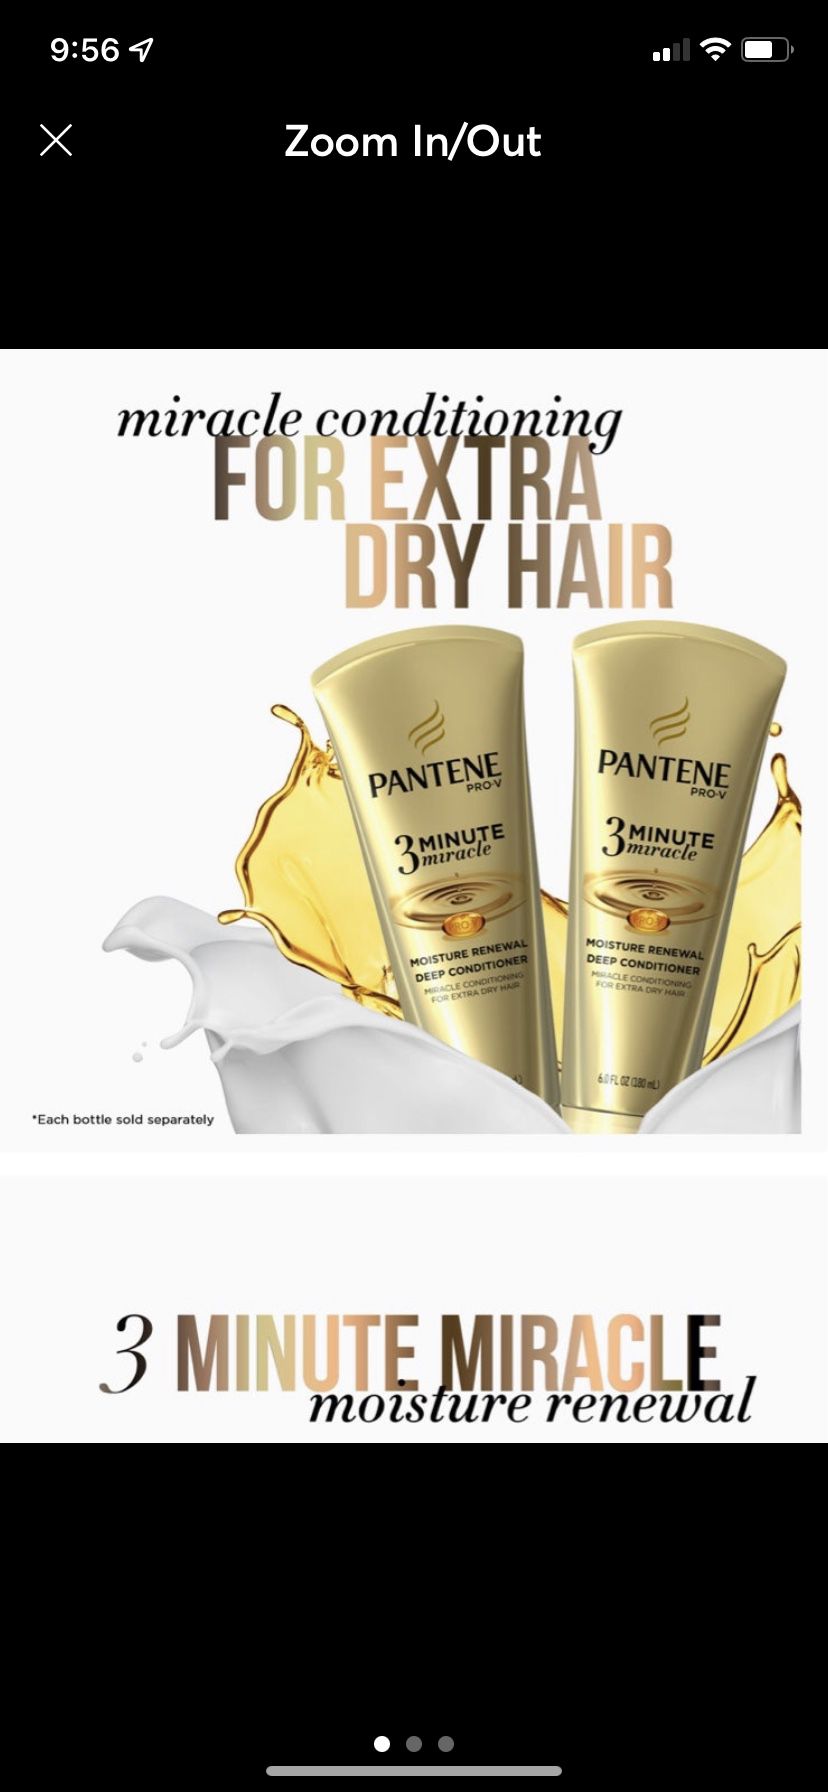 2 Pantene Pro V 3 Minute Miracle DAILY MOISTURE RENEWAL Dry Hair Conditioner 8oz